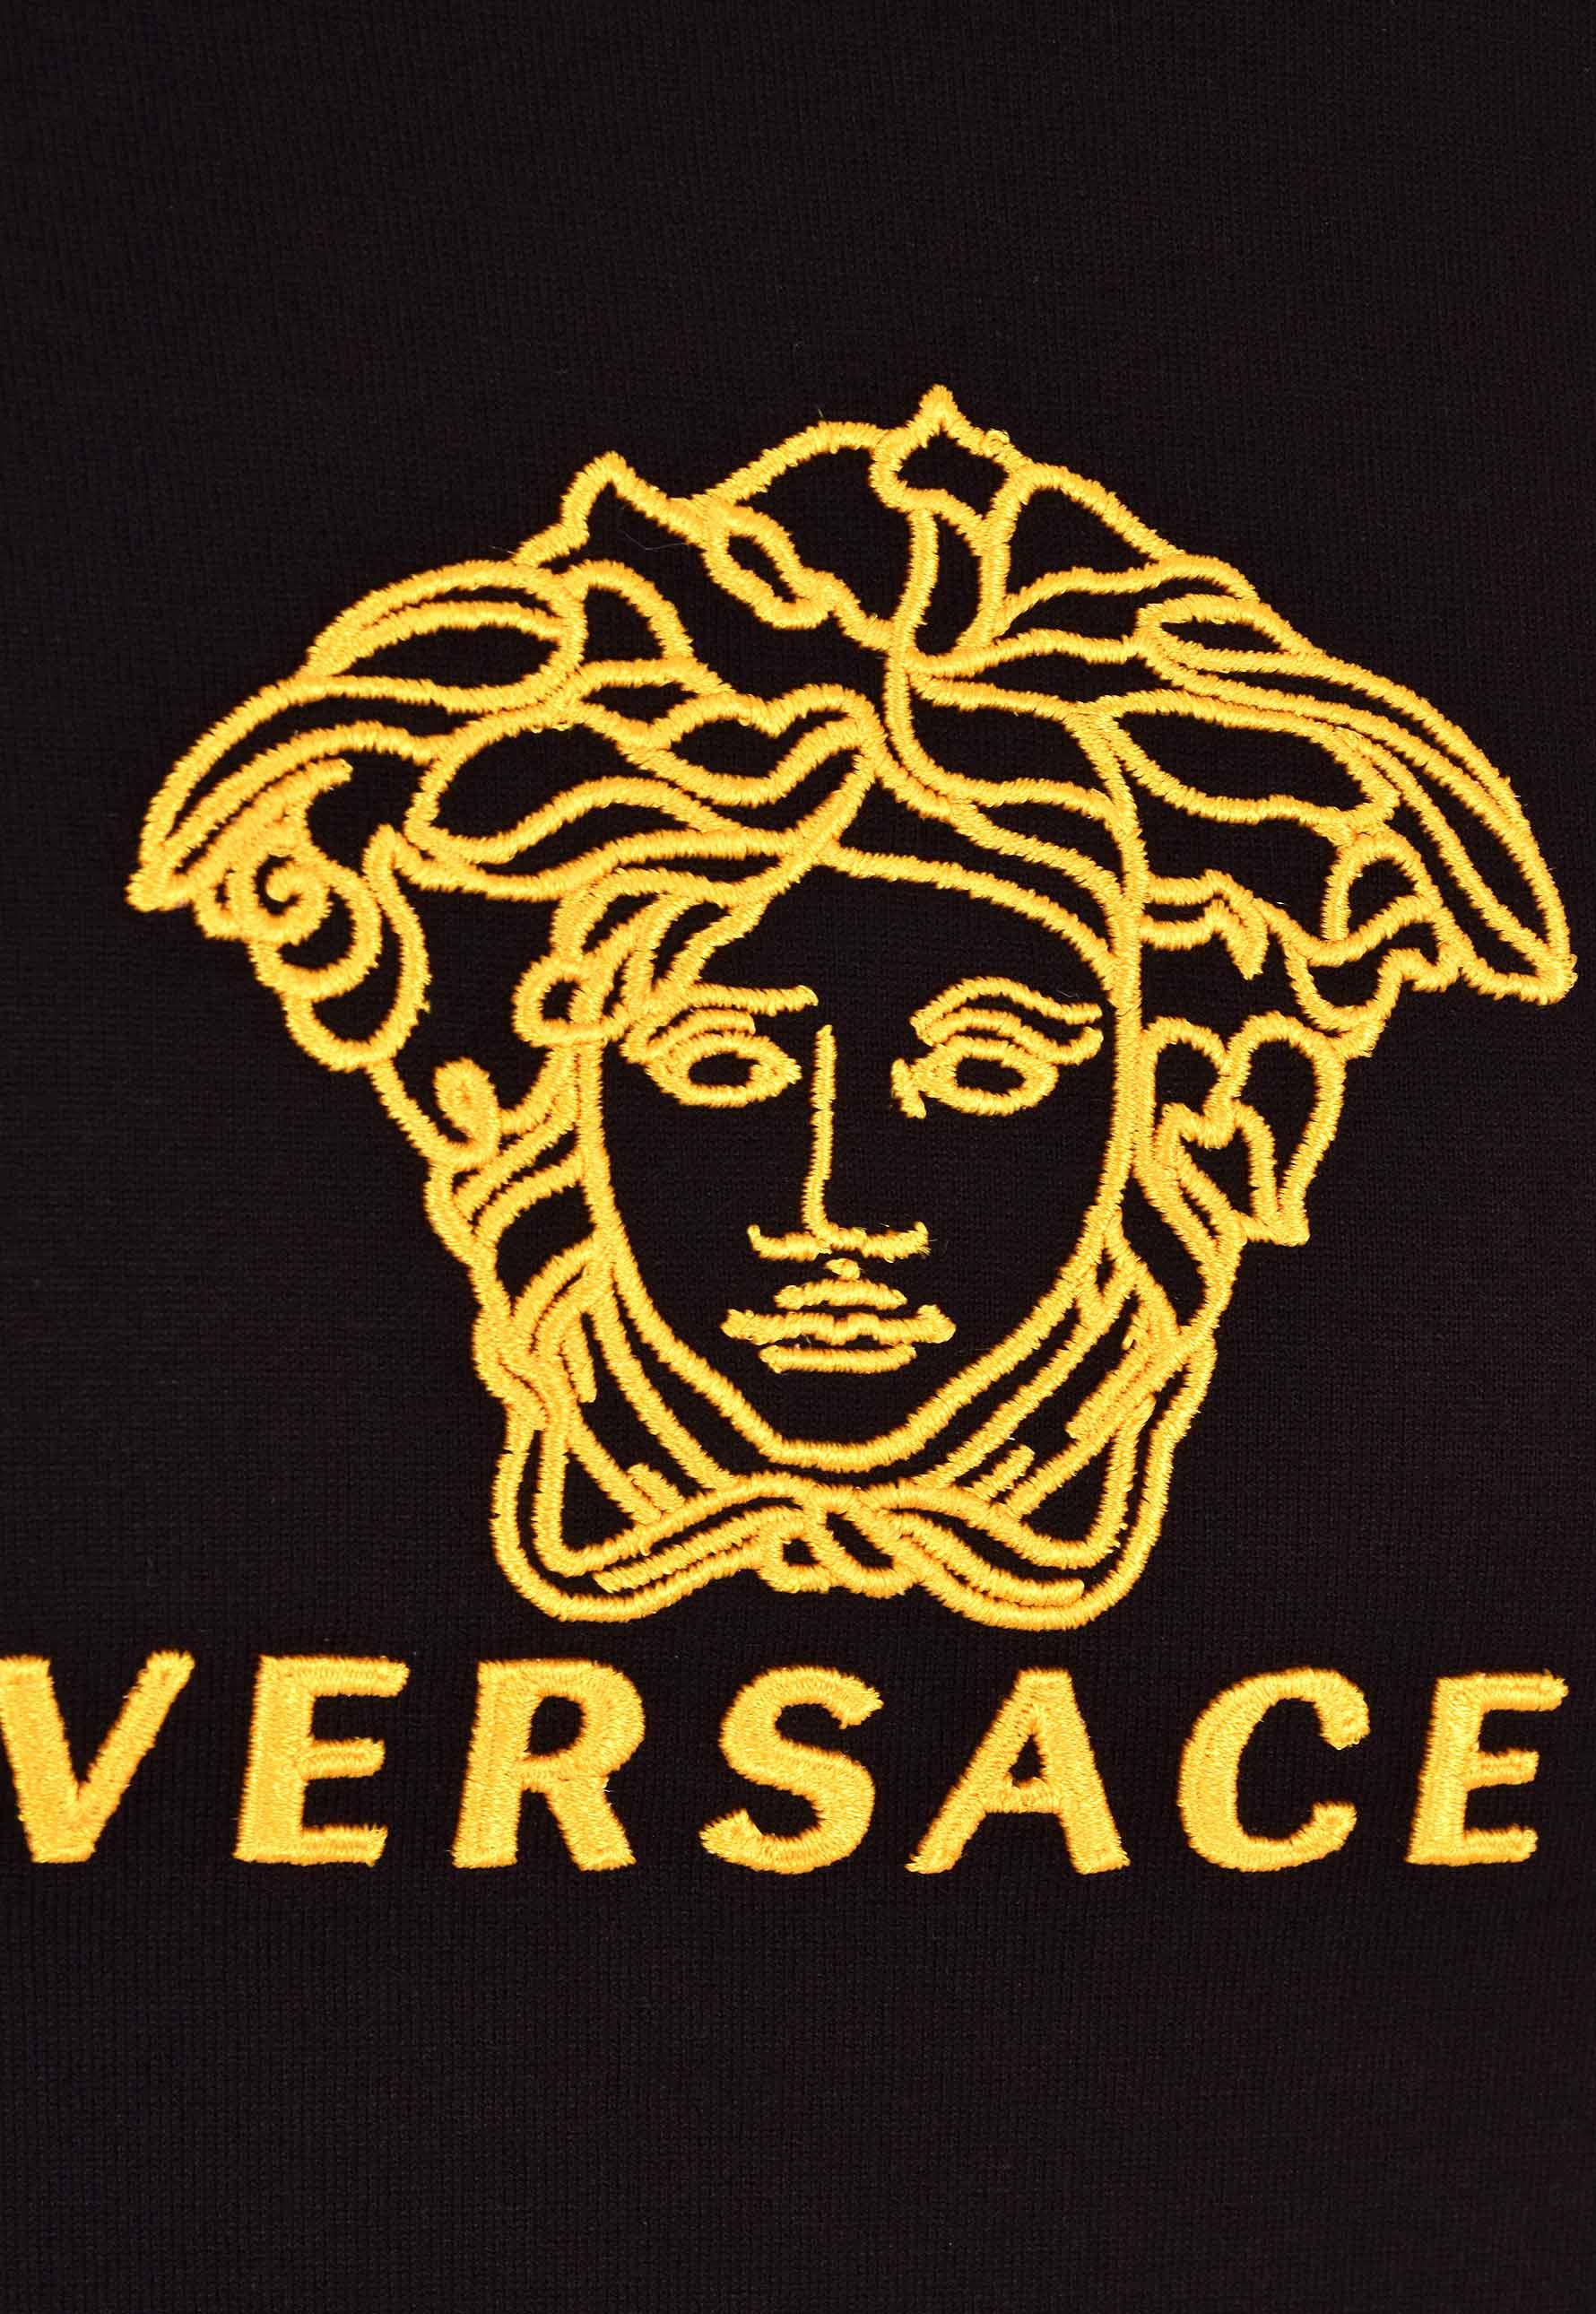 Versace Logo Black And Gold - Get Images